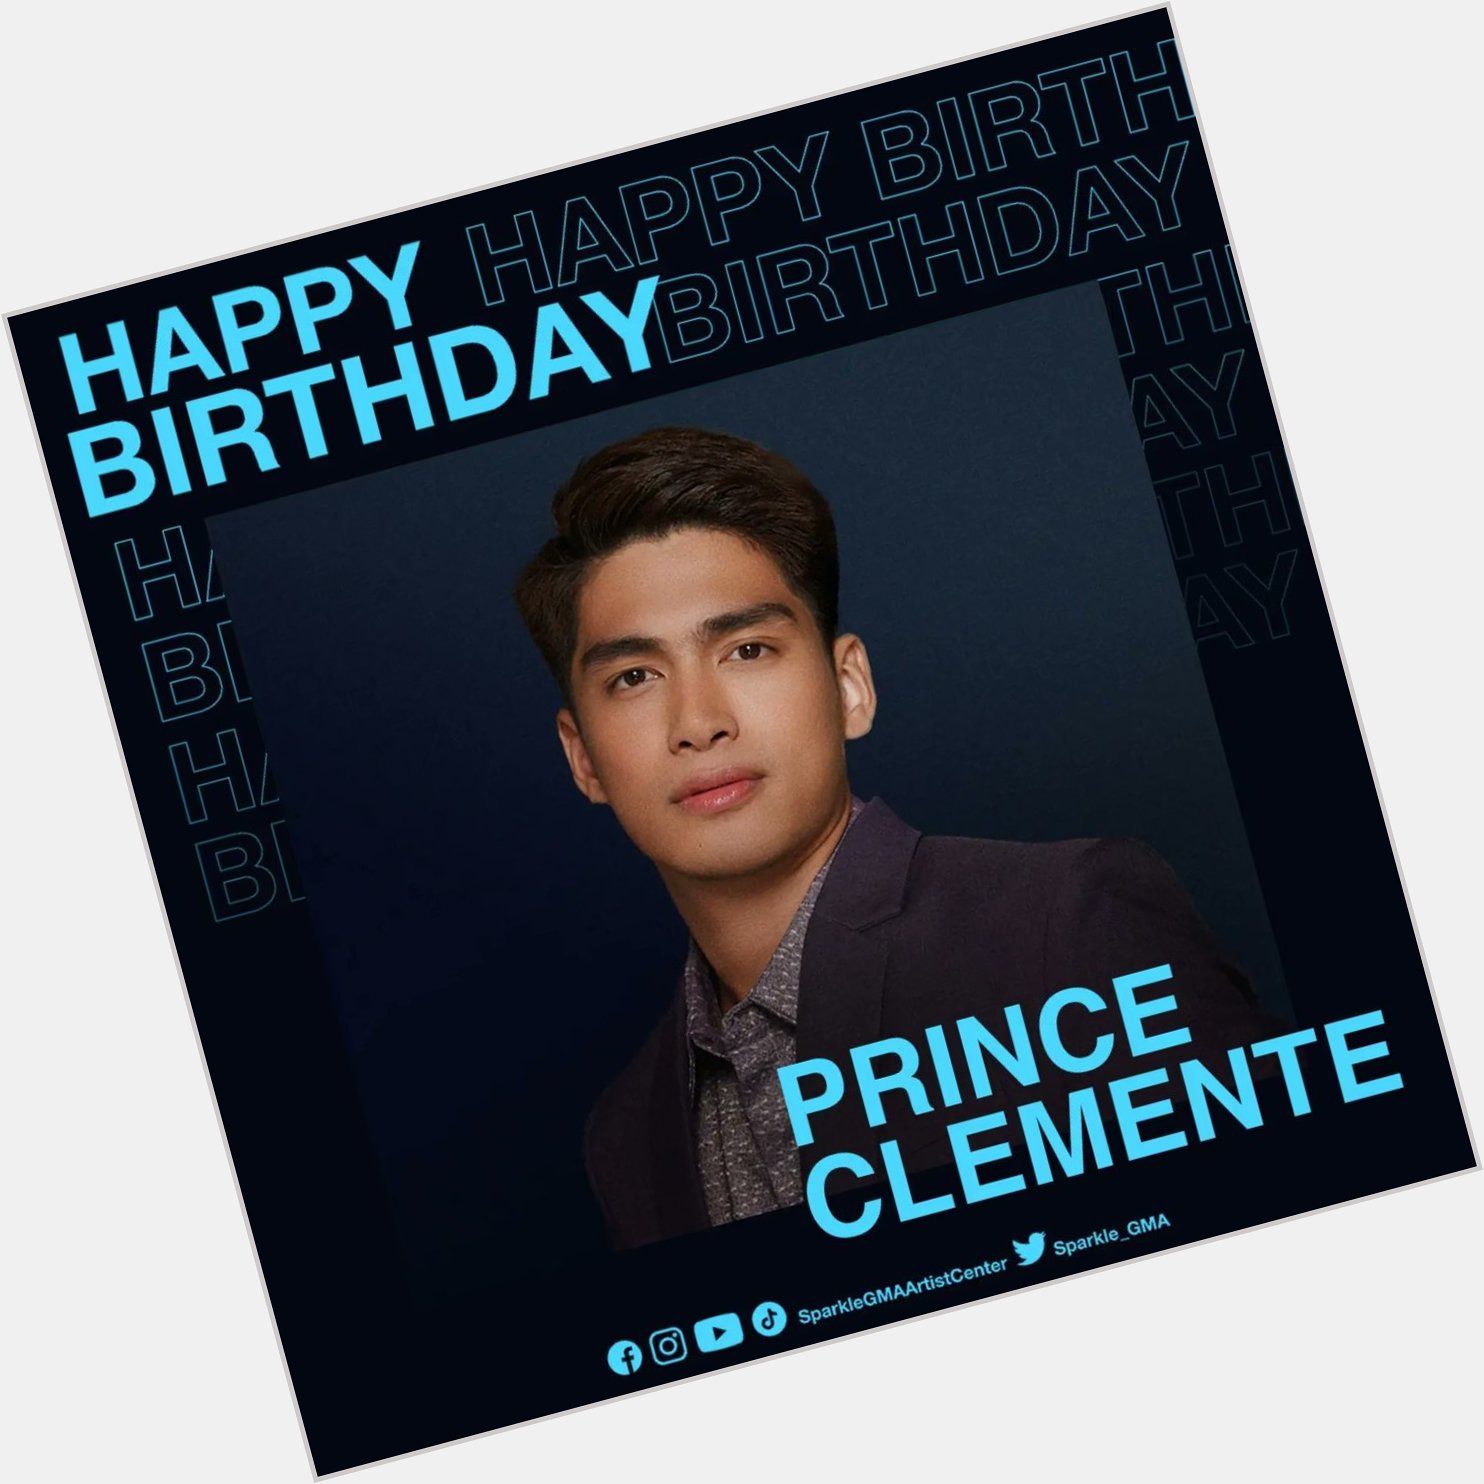 Happy Birthday, Prince Clemente  We hope all your birthday wishes come true     